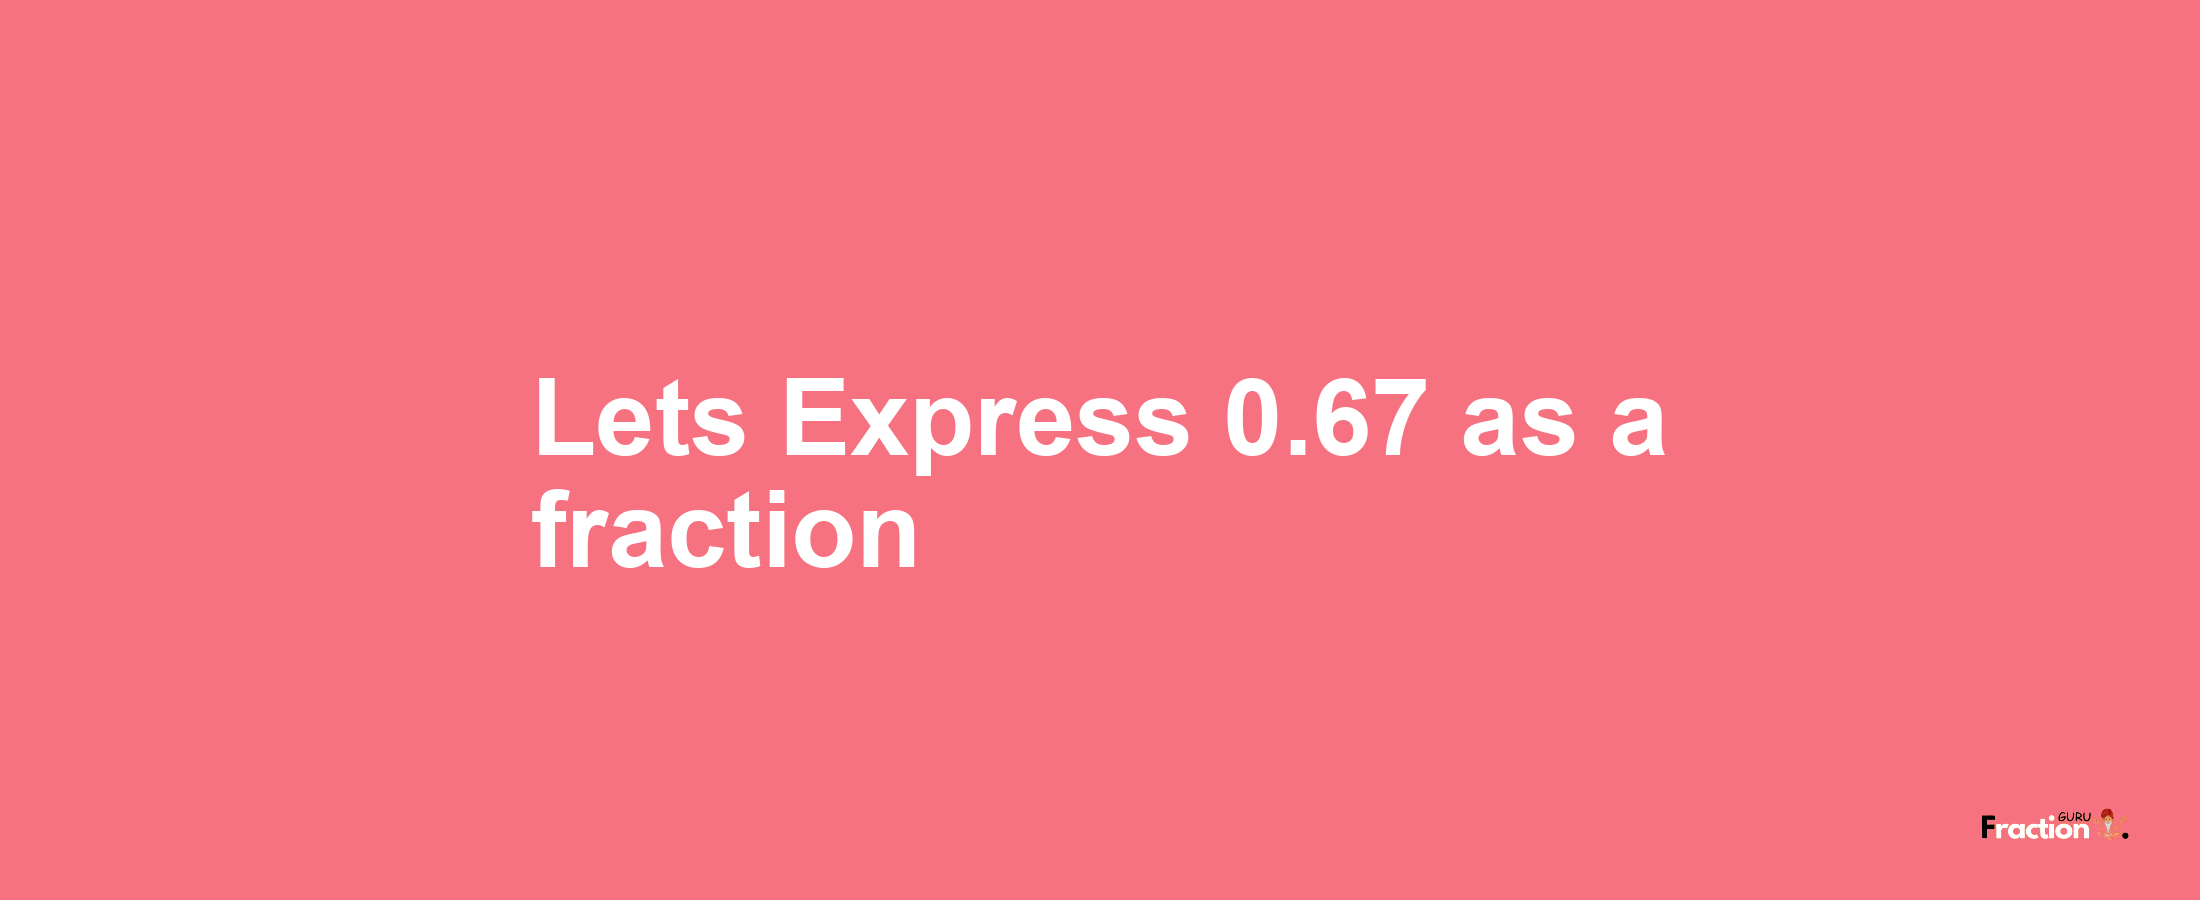 Lets Express 0.67 as afraction